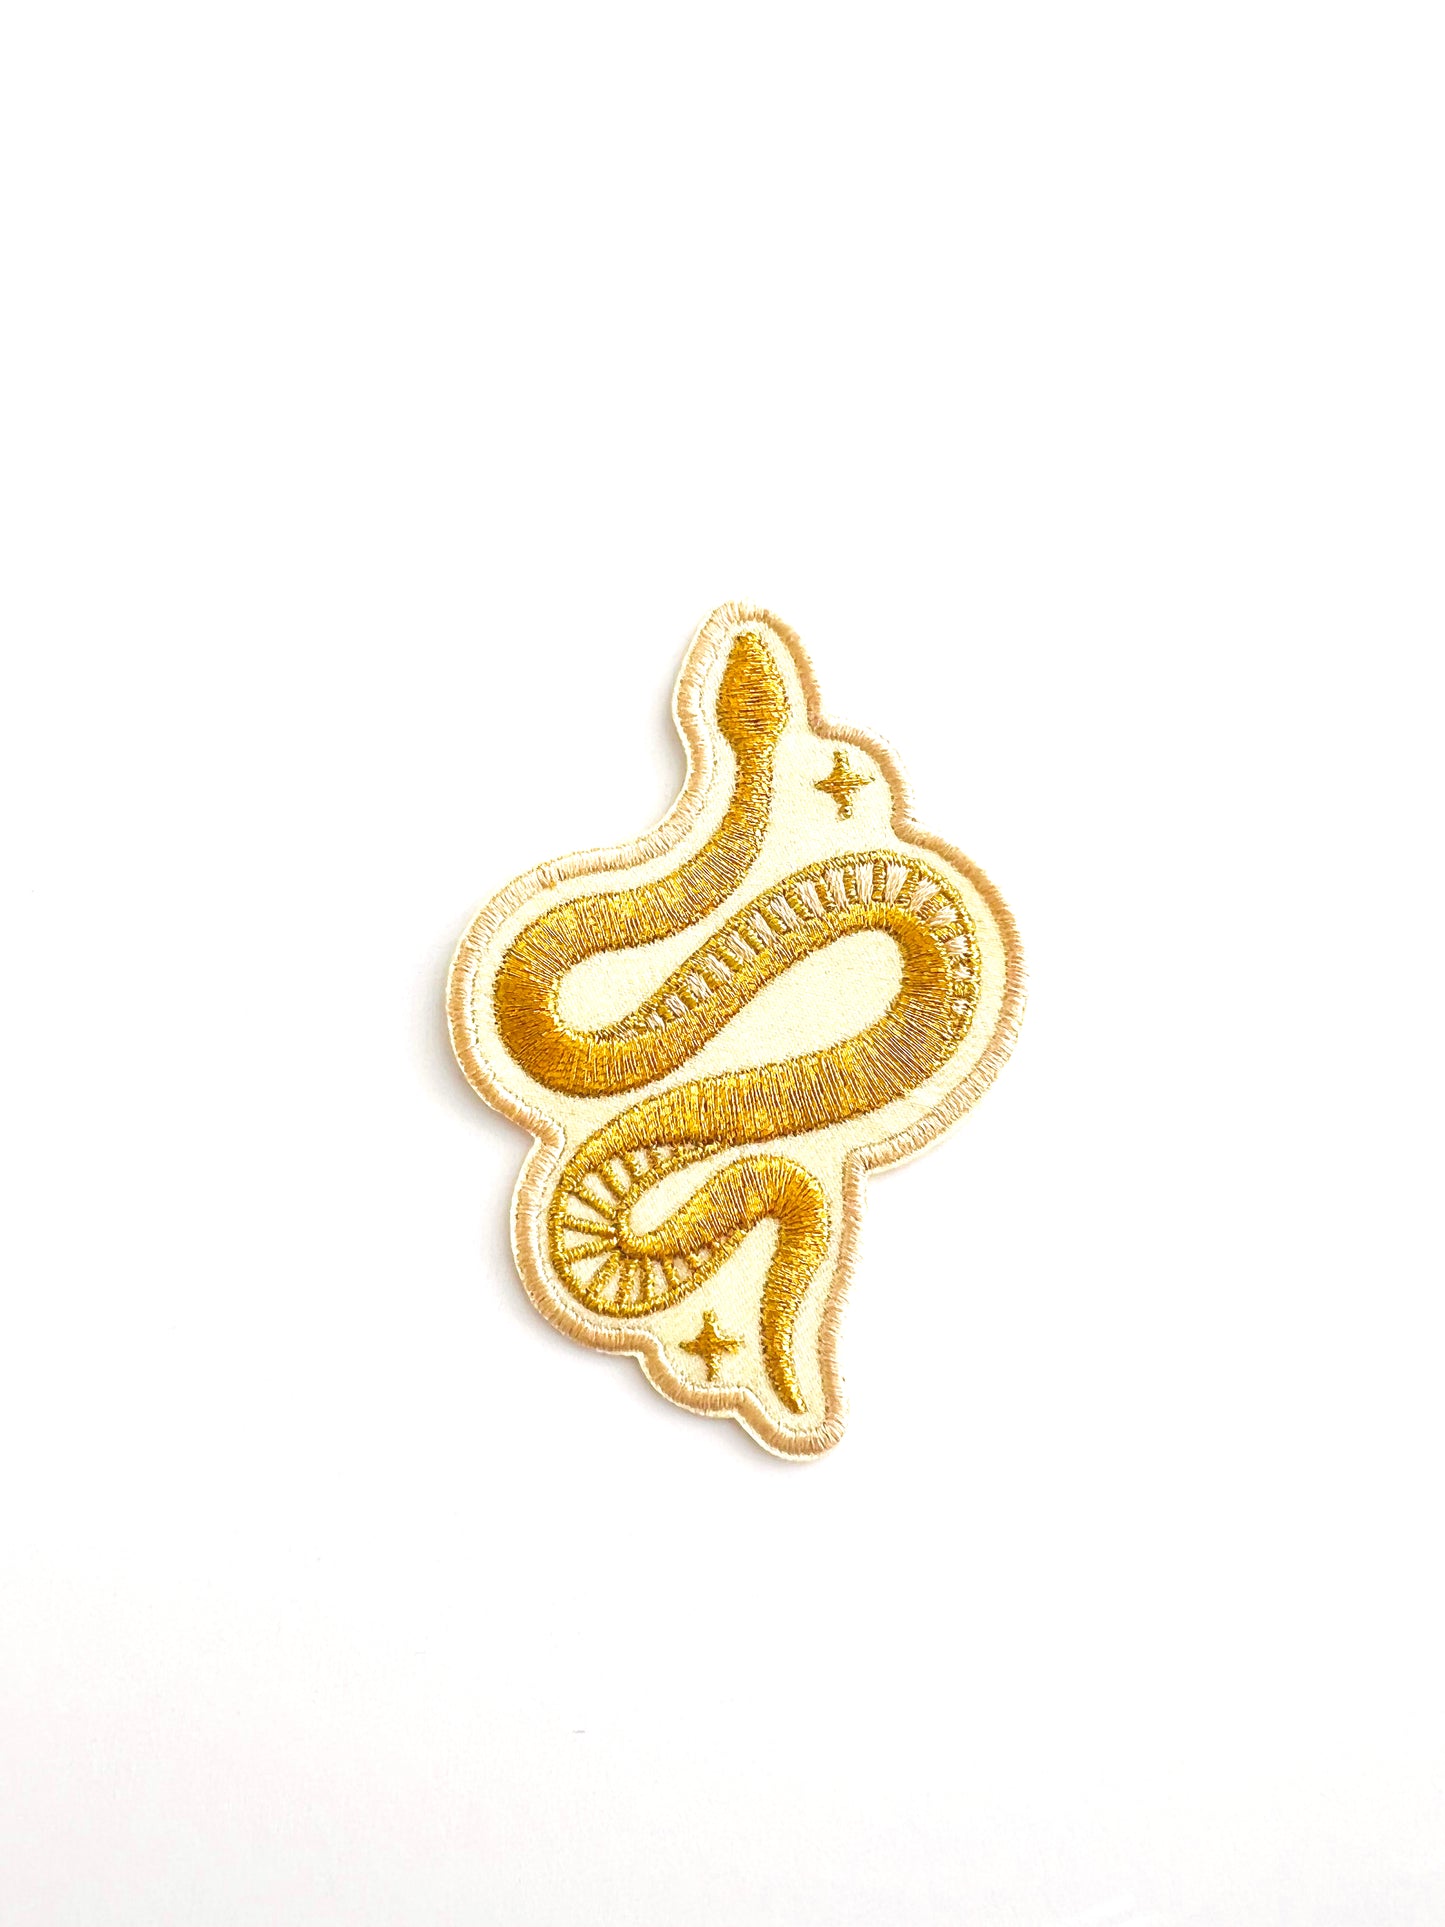 Metallic Gold Snake Embroidered (Iron-On) Patch